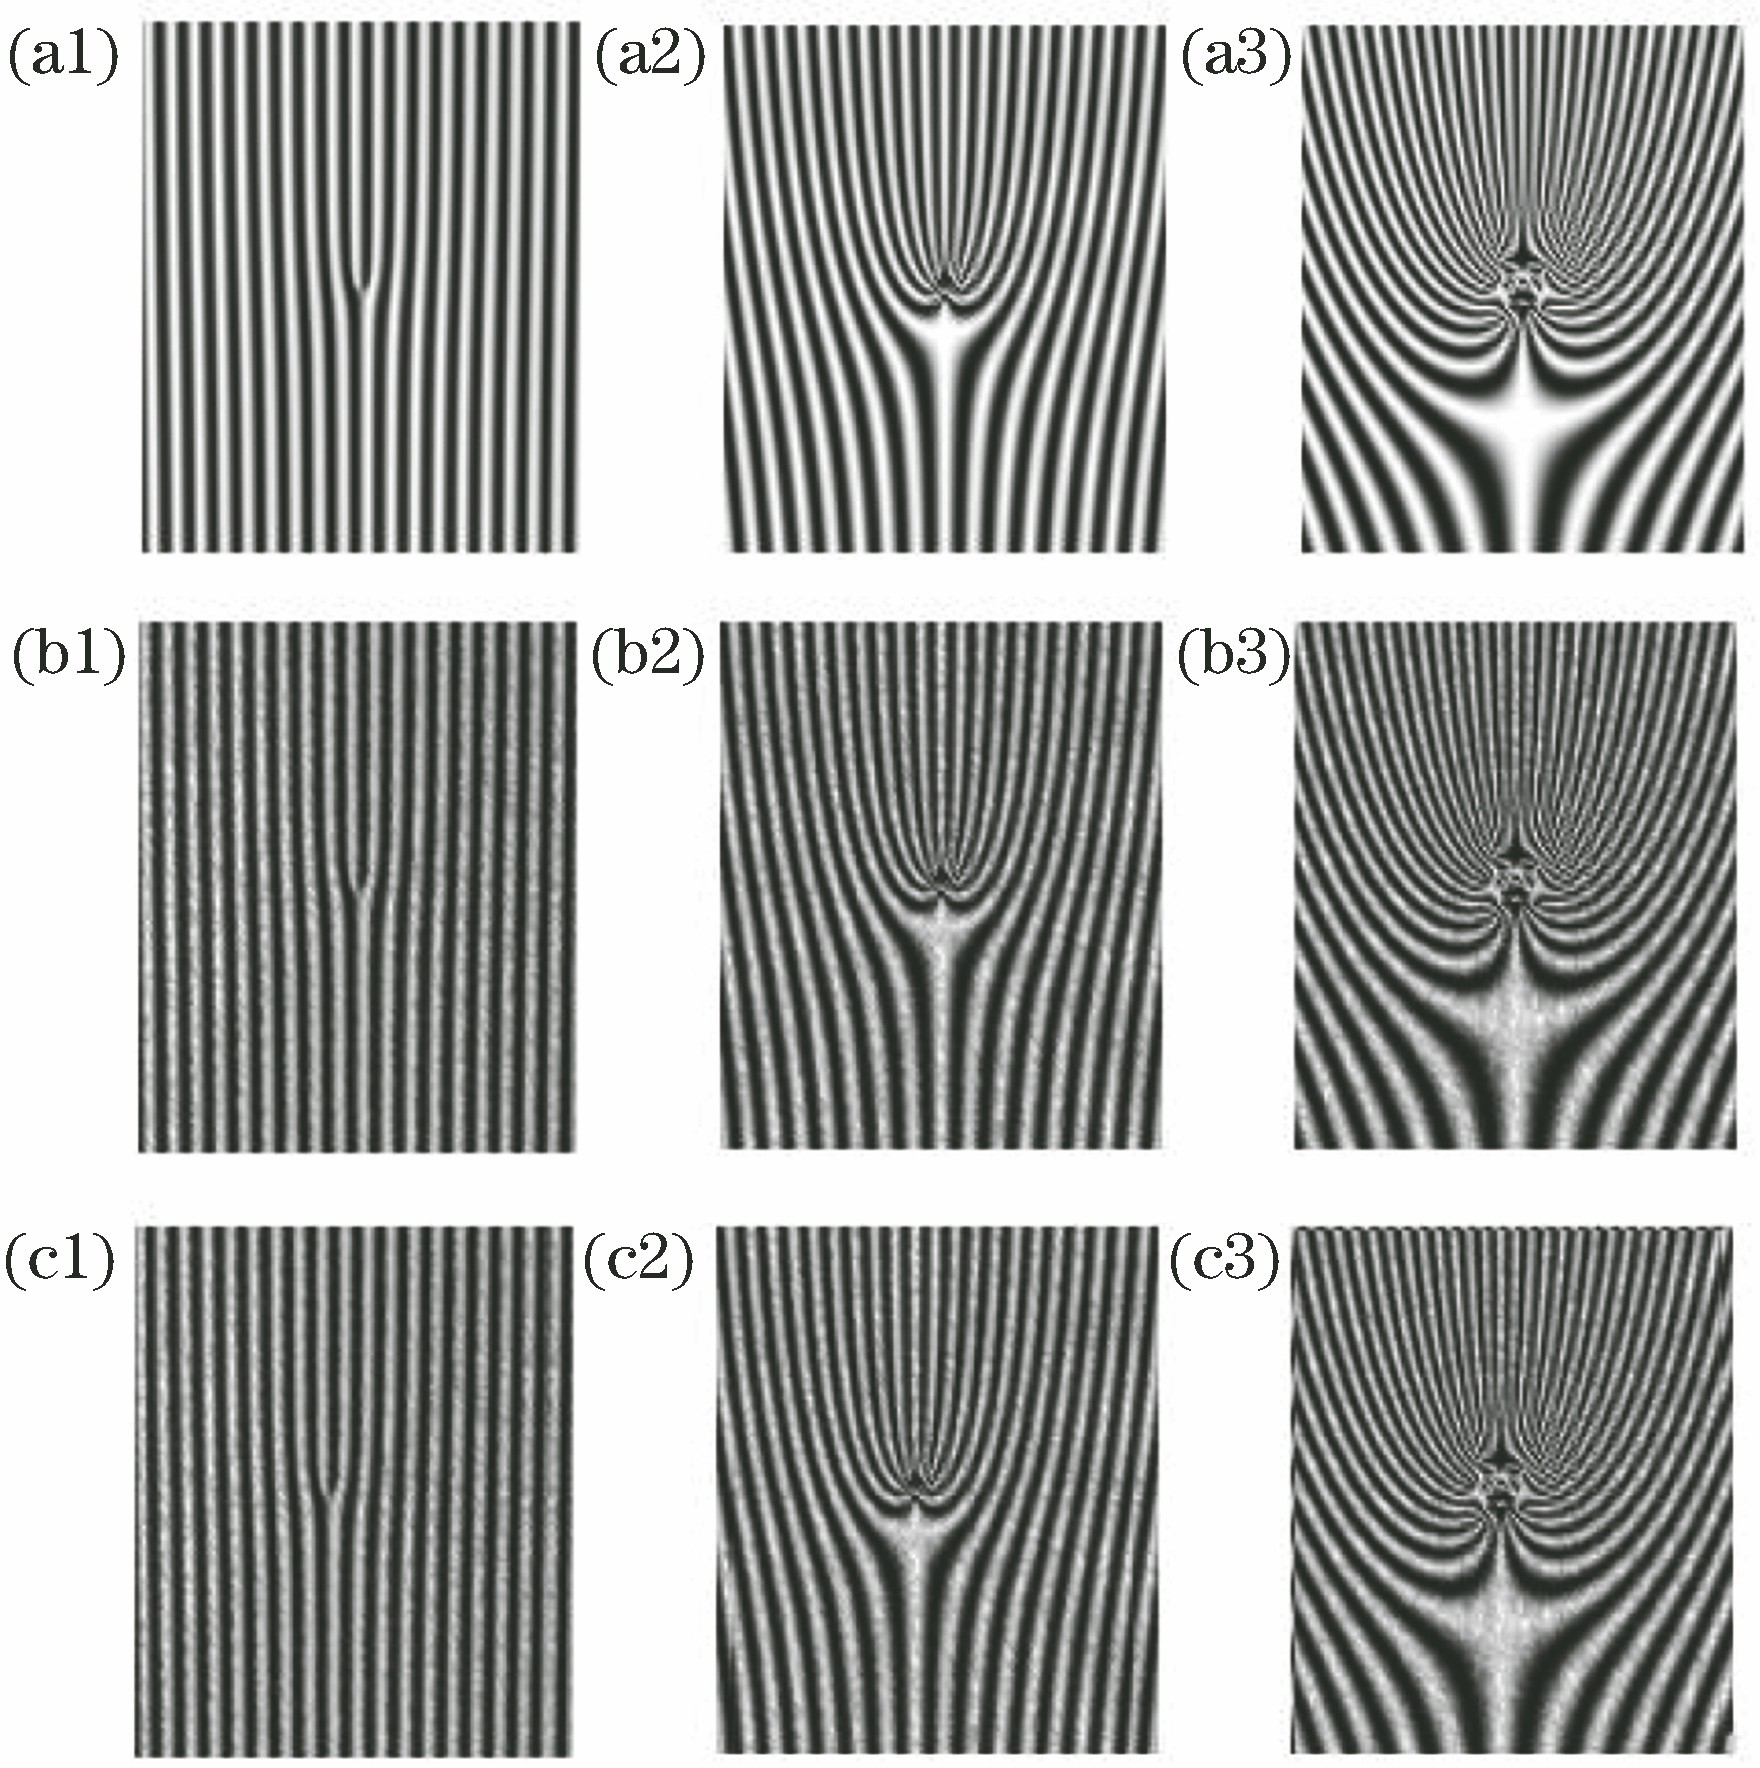 Displacements of interference fringes under different turbulence intensities. (a1) Static water, l=1; (a2) static water, l=10; (a3) static water, l=30; (b1) weak turbulence, l=1; (b2) weak turbulence, l=10; (b3) weak turbulence, l=30; (c1) strong turbulence, l=1; (c2) strong turbulence, l=10; (c3) strong turbulence, l=30